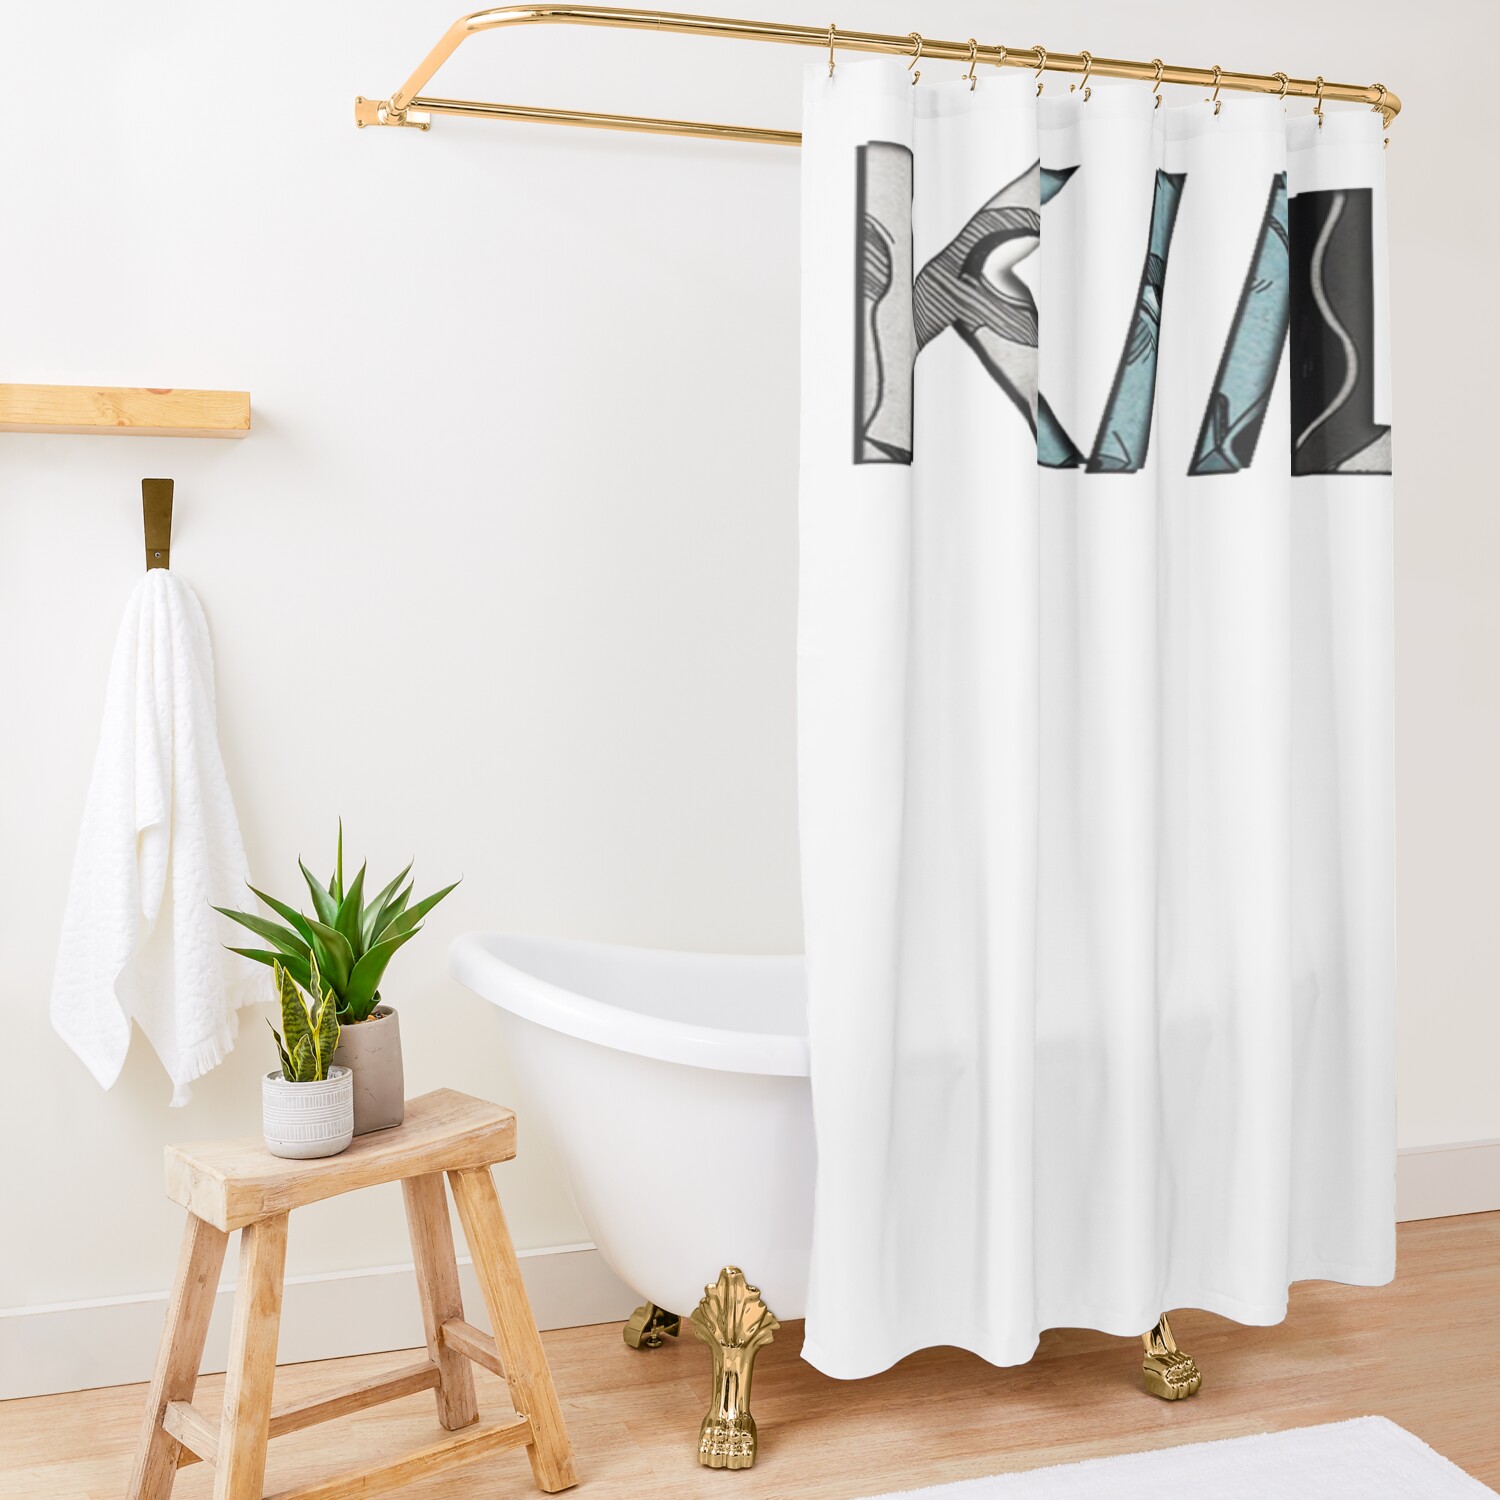 urshower curtain opensquare1500x1500 6 - Knocked Loose Shop